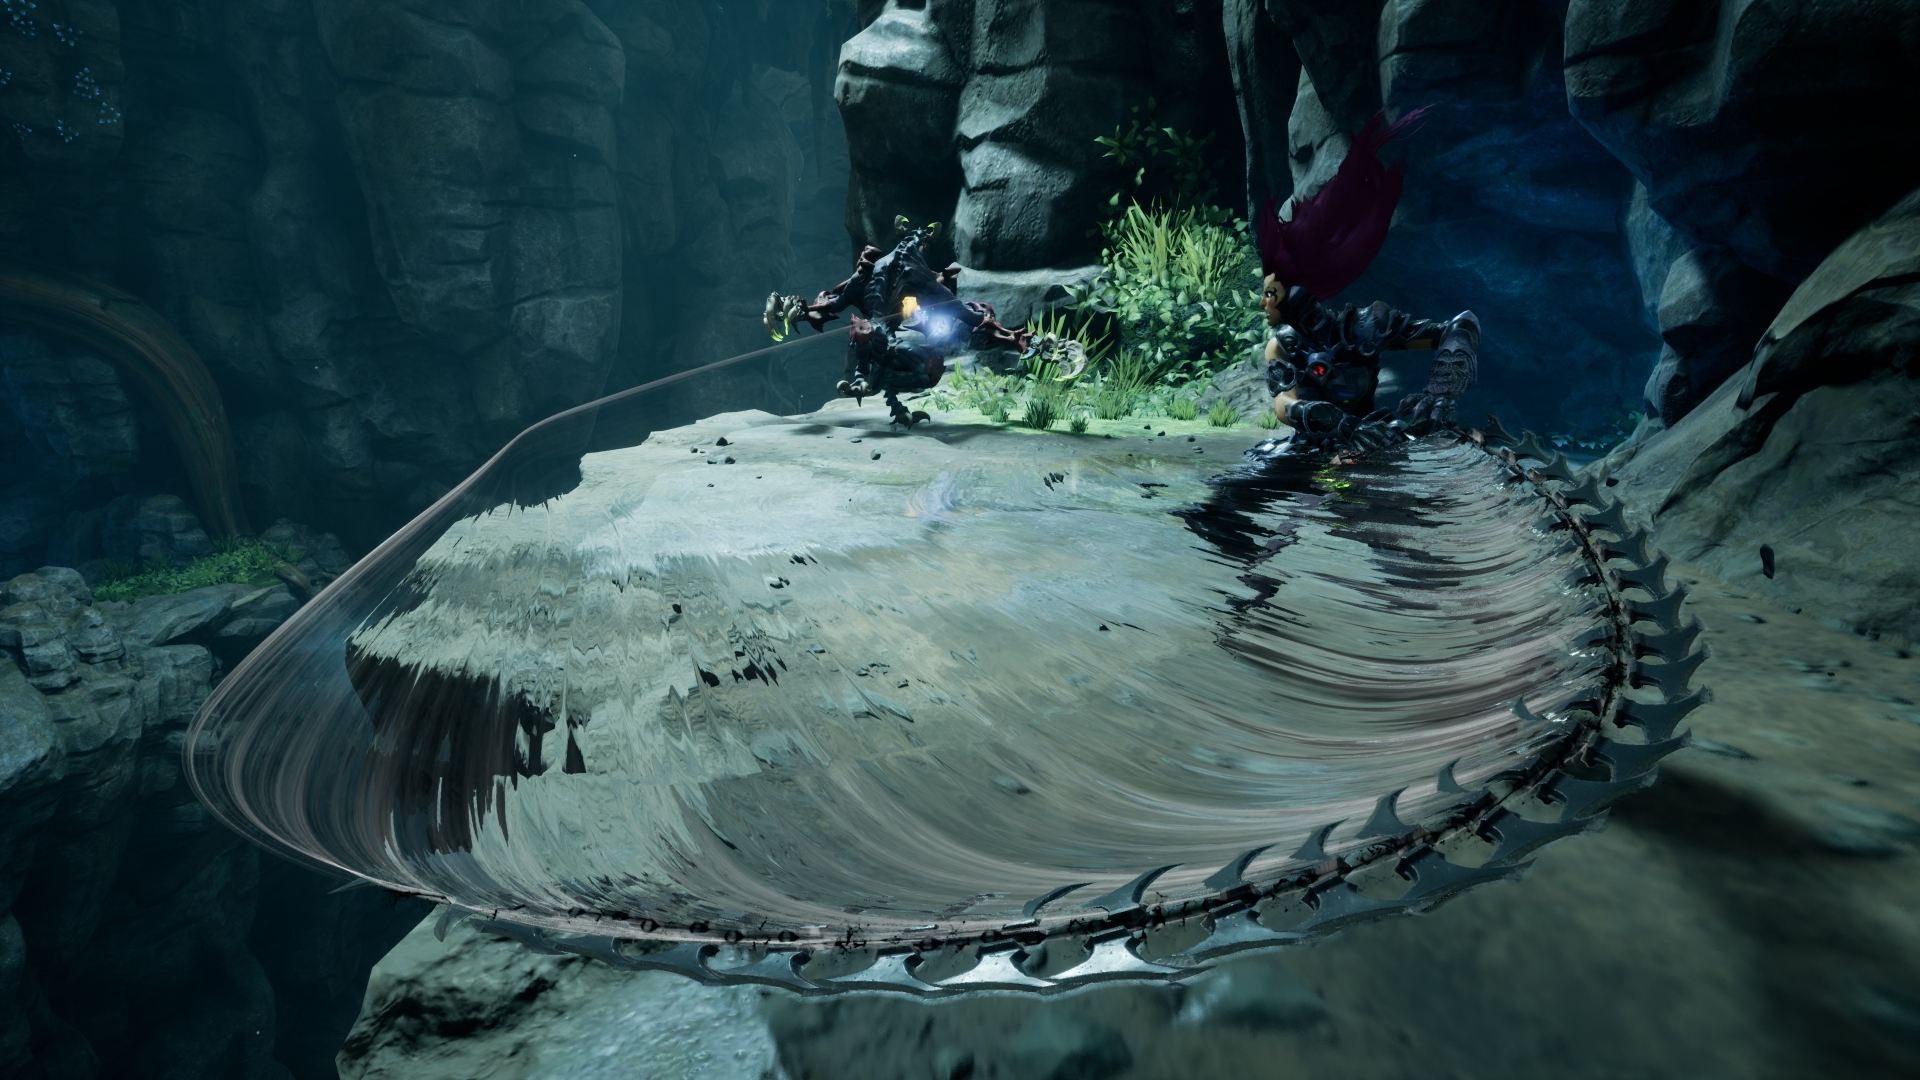 Find the best laptops for Darksiders III